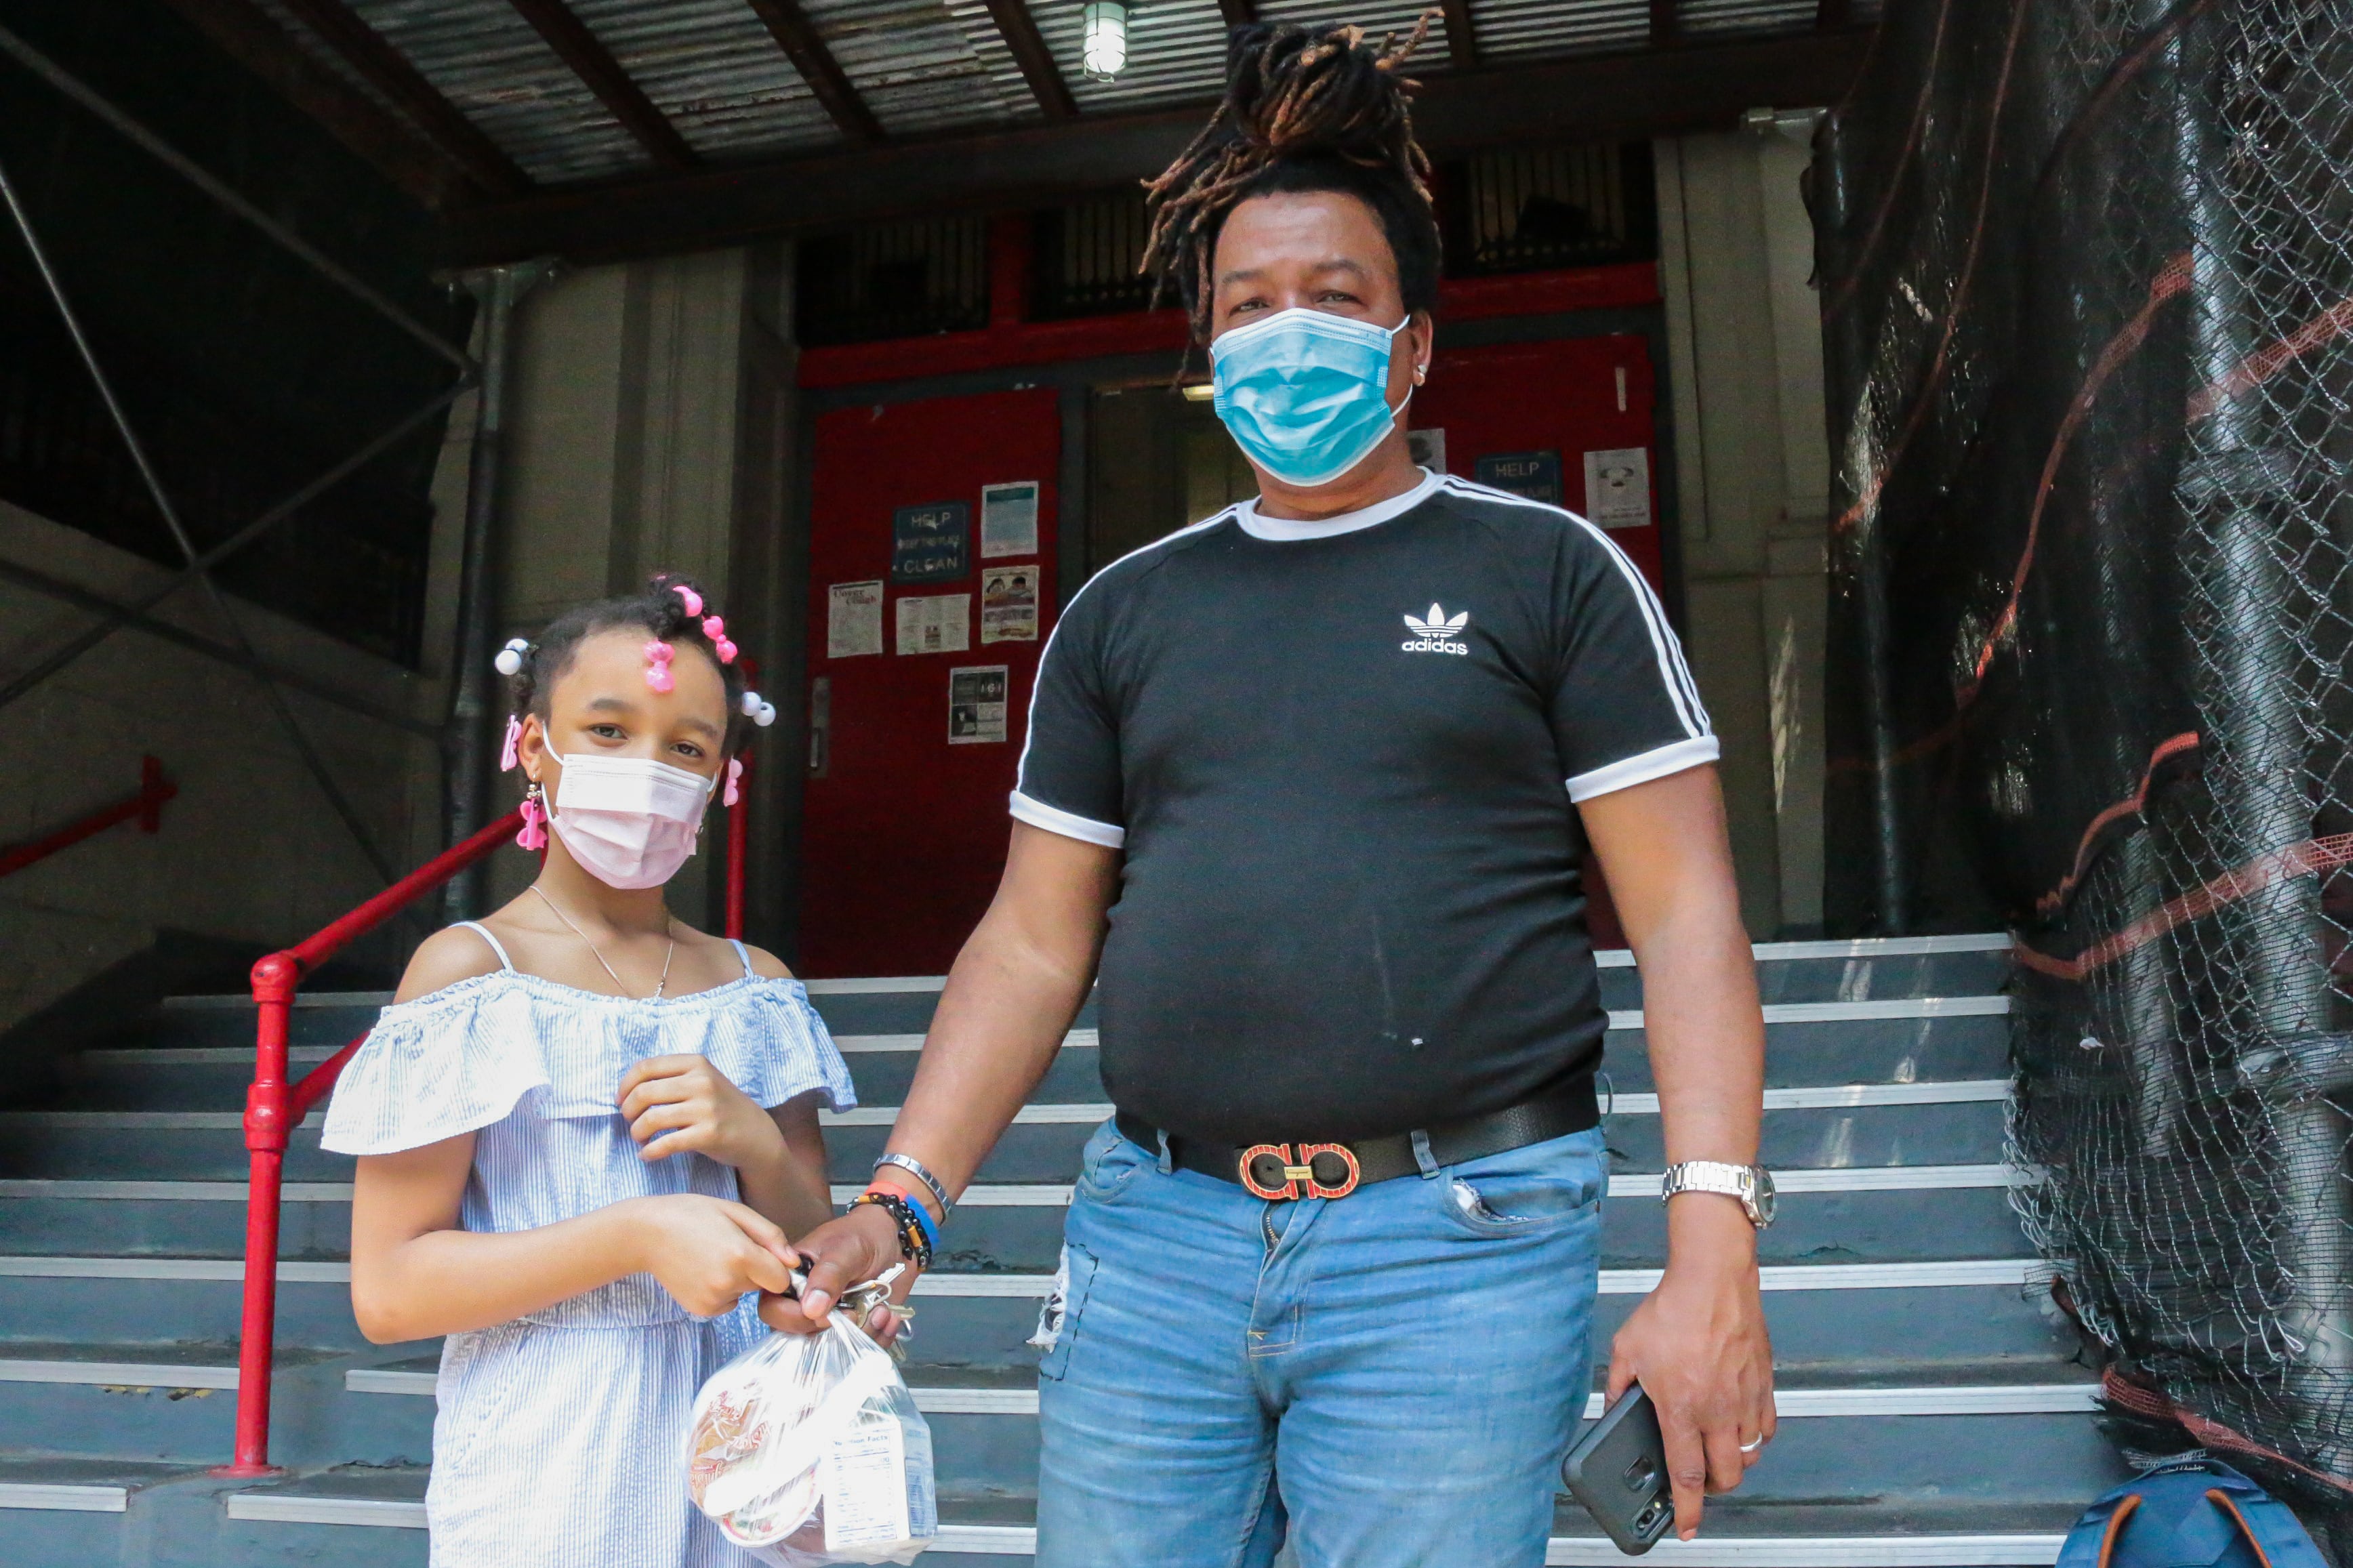 A young girl wearing a white dress, pink surgical mask, and pink and white jewelry in her hair holds her father’s hand, who is wearing a black Adidas shirt, blue jeans and a blue surgical mask.